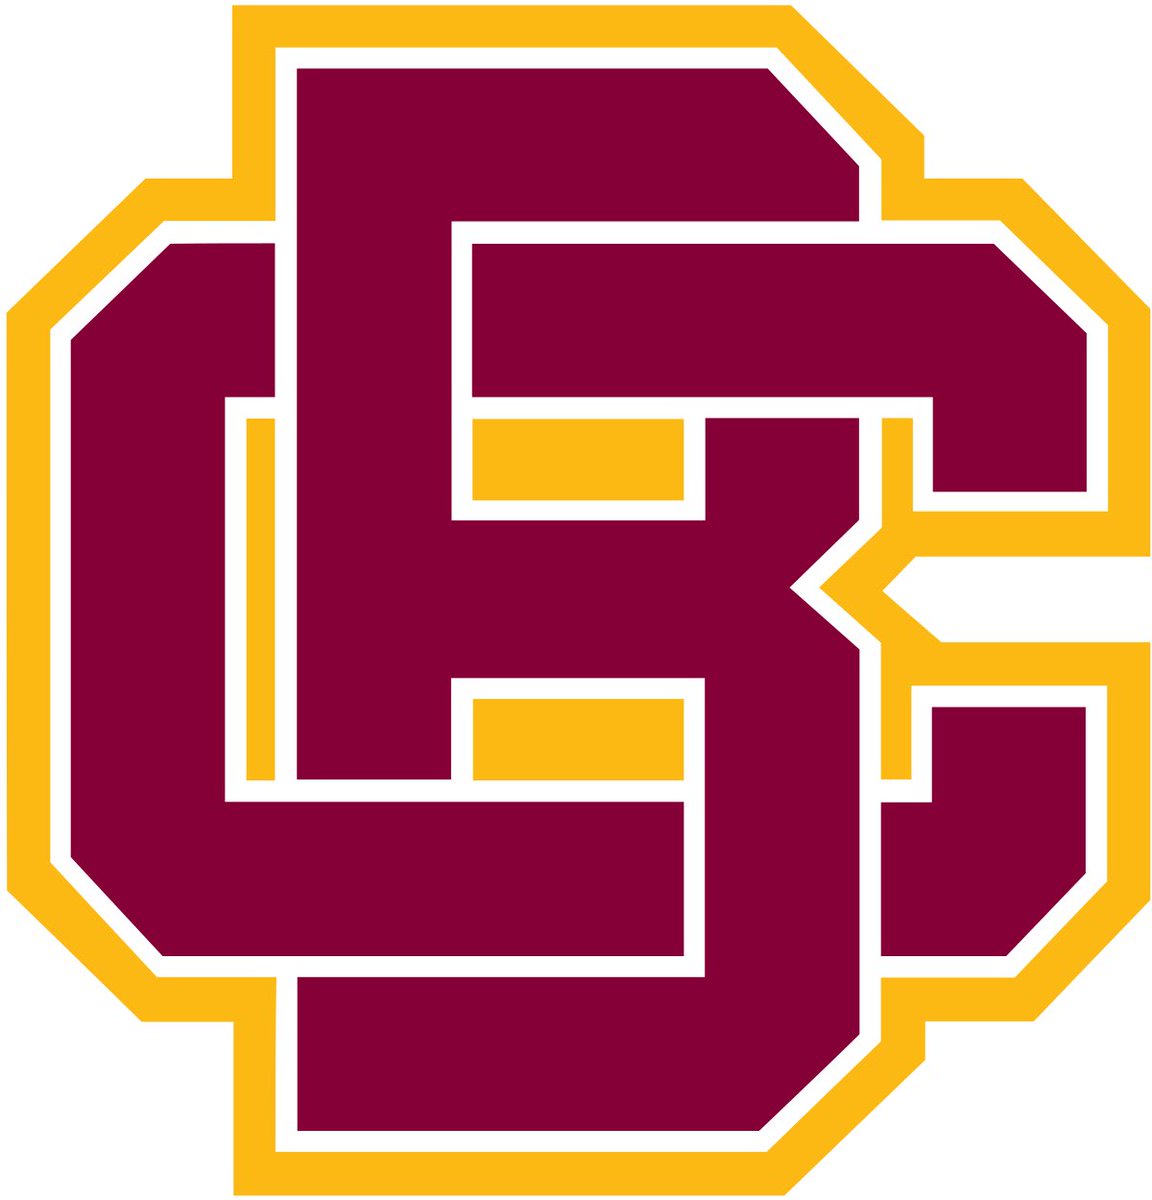 Bethune-Cookman Offered! @14twalk @sims_coach @Coach_RGreeN @Andrew_Ivins @TheCribSouthFLA @GabyUrrutia247 @raw7v7